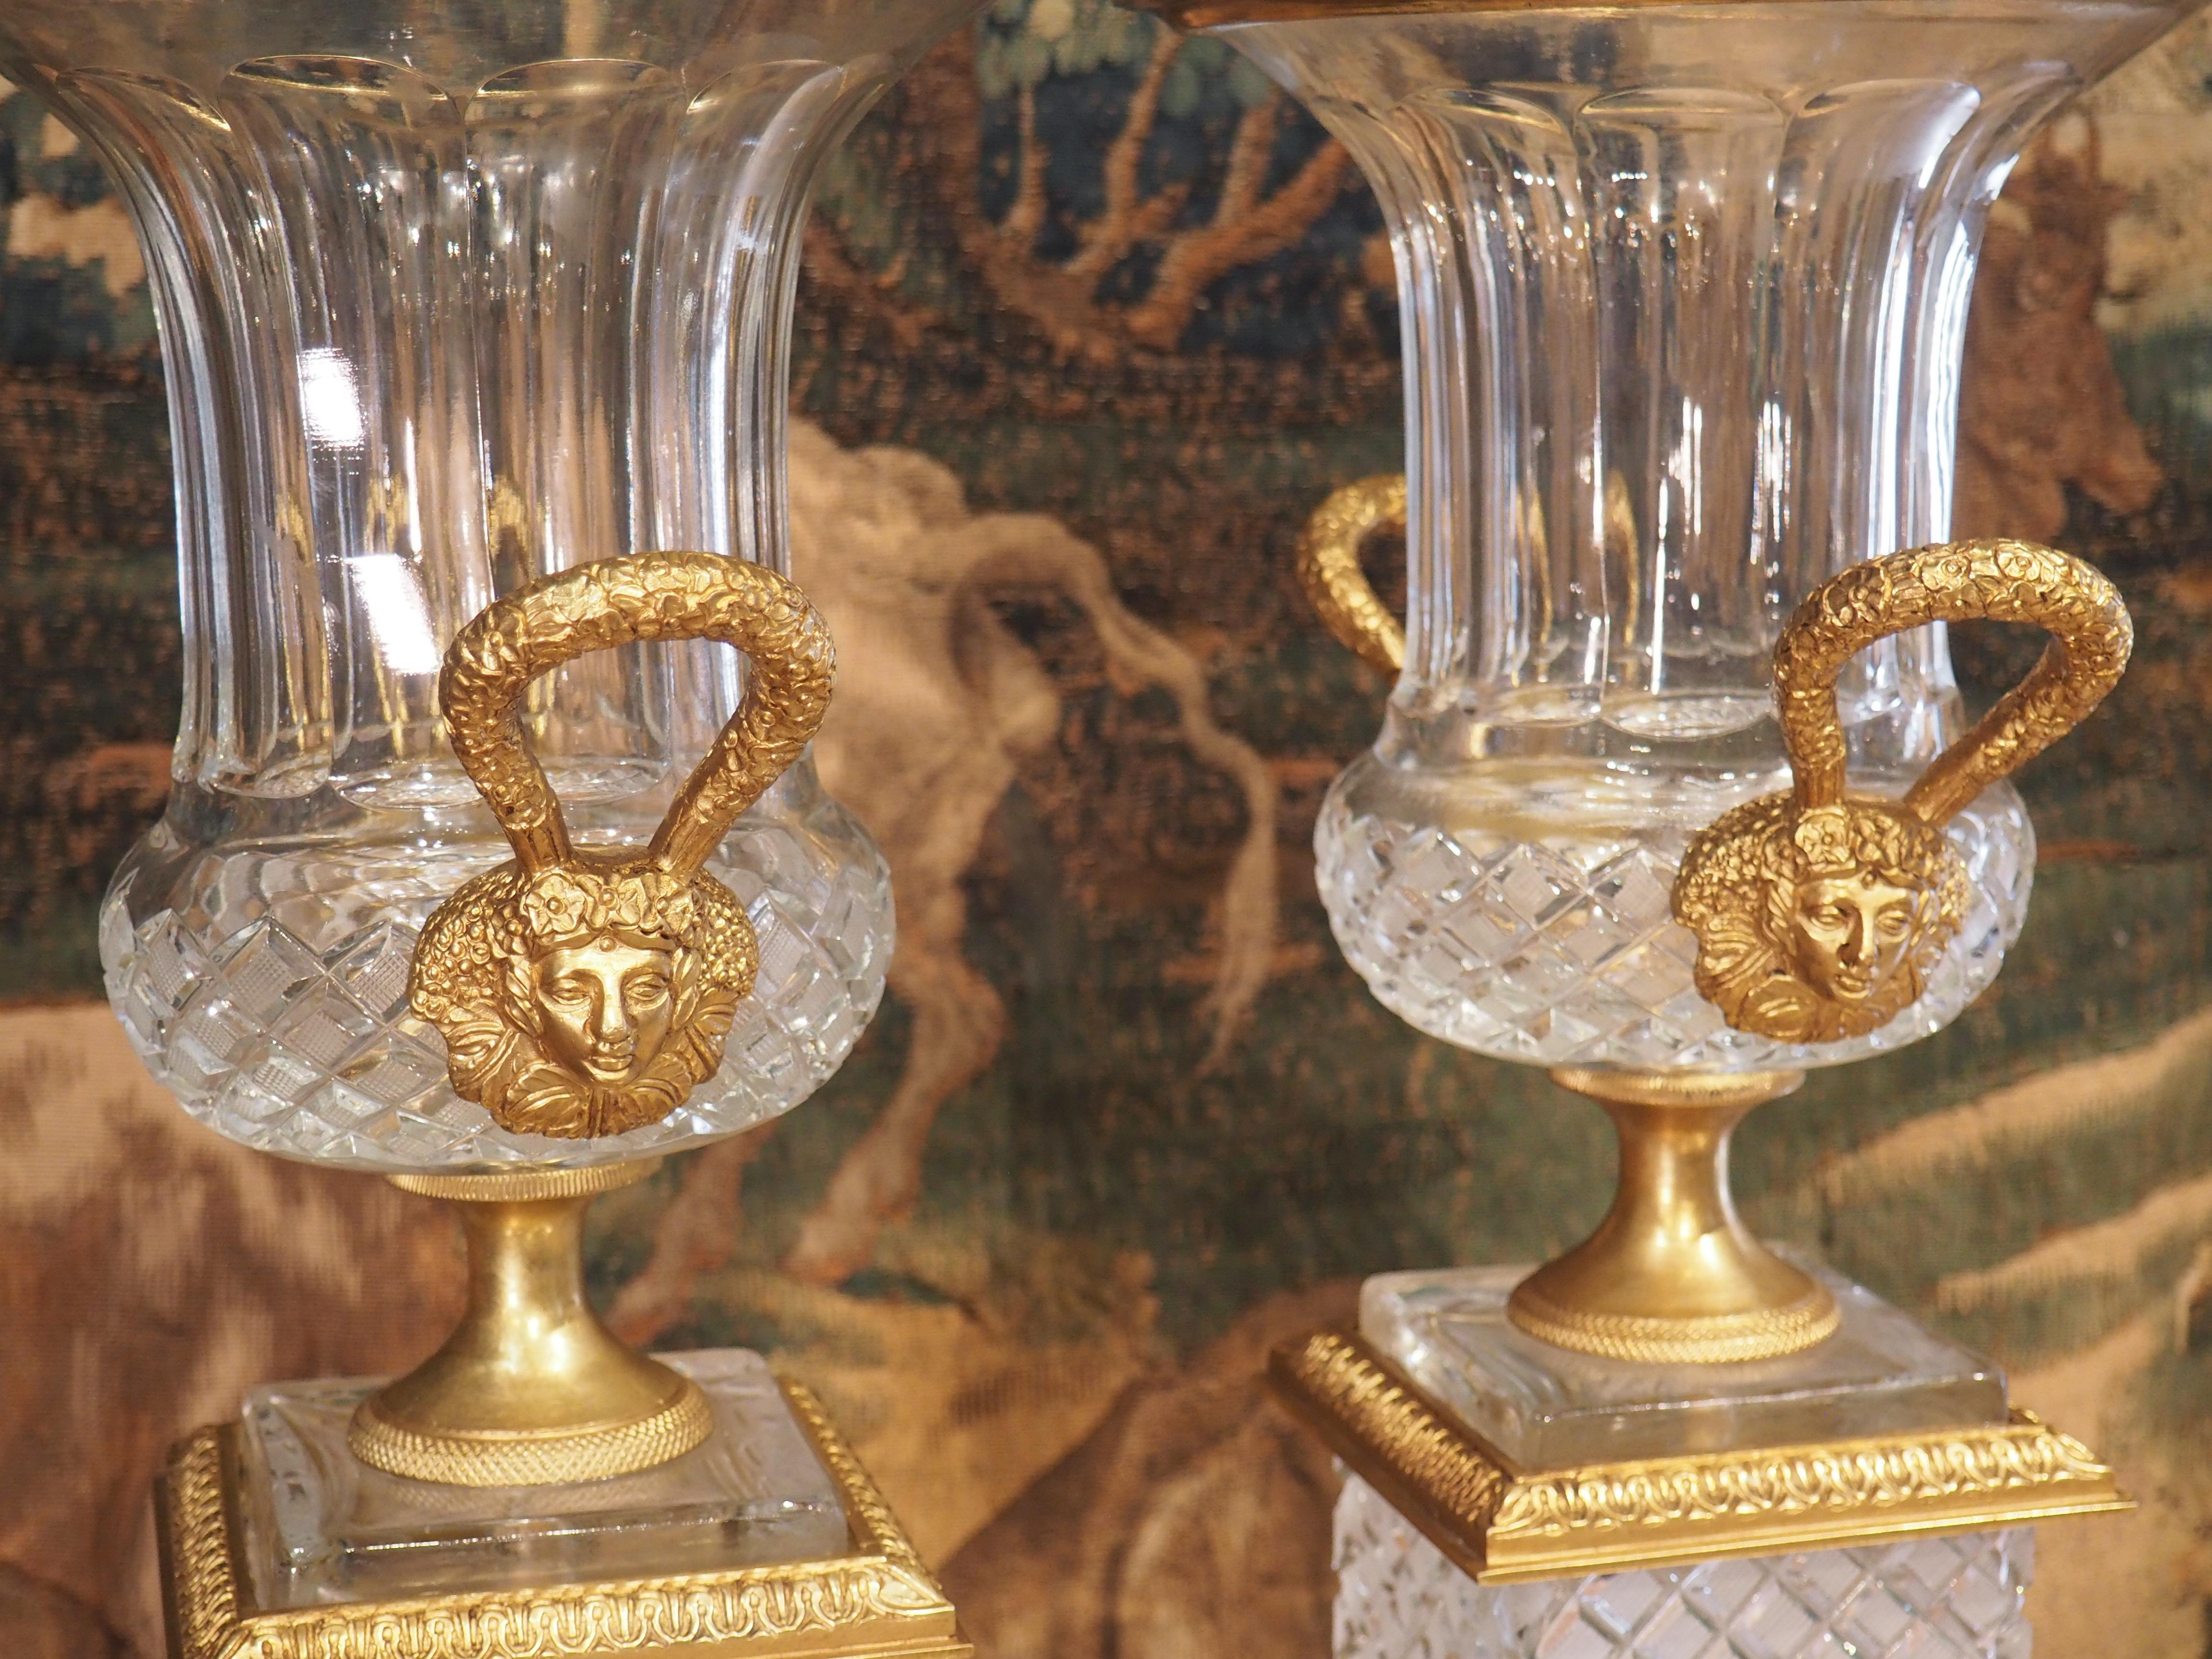 This beautiful pair of glass and gilt bronze vases was produced in France in the early 1900’s and have an overall height of over 20 inches. The calyx krater vases are made of cut glass embellished with gadrooned necks and lozenge patterned bodies.